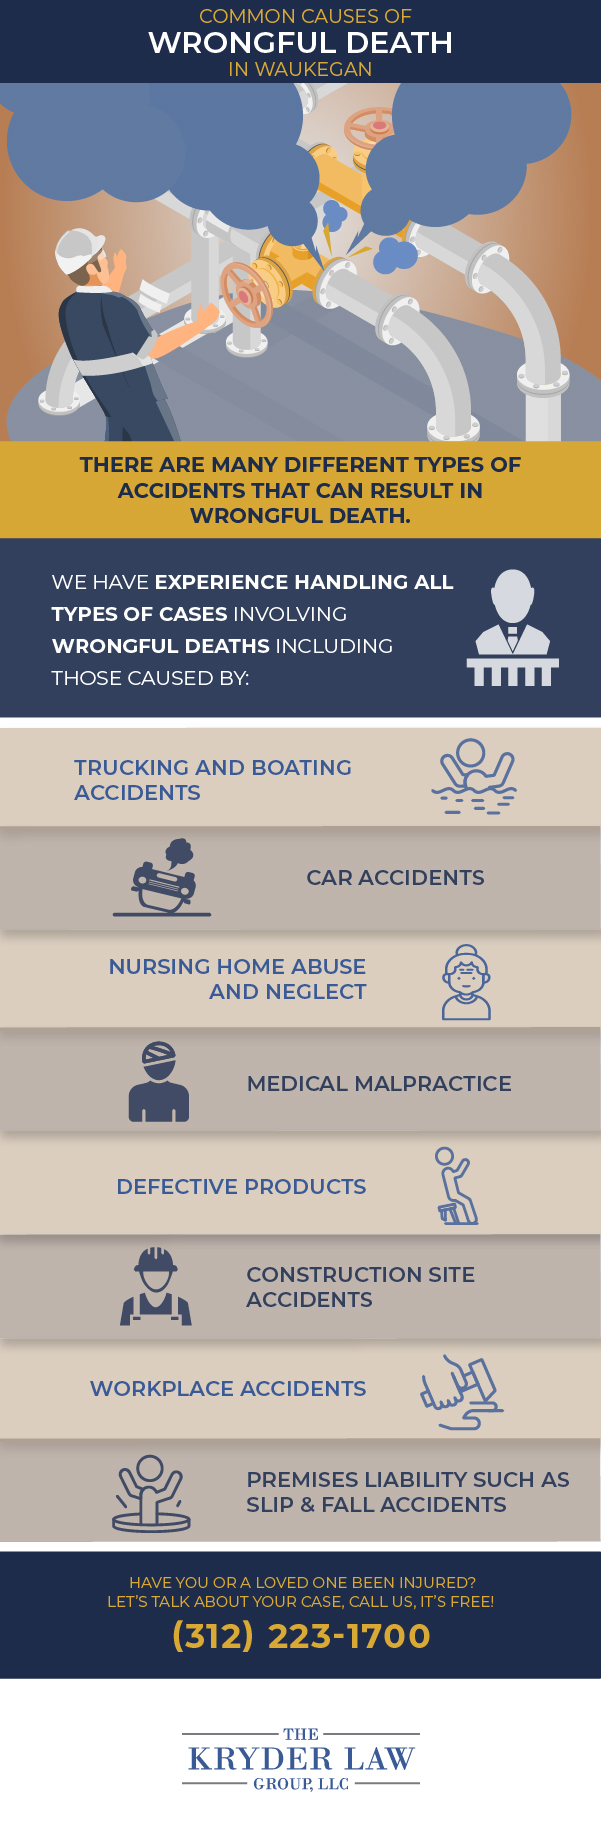 Common Causes of Wrongful Death in Waukegan